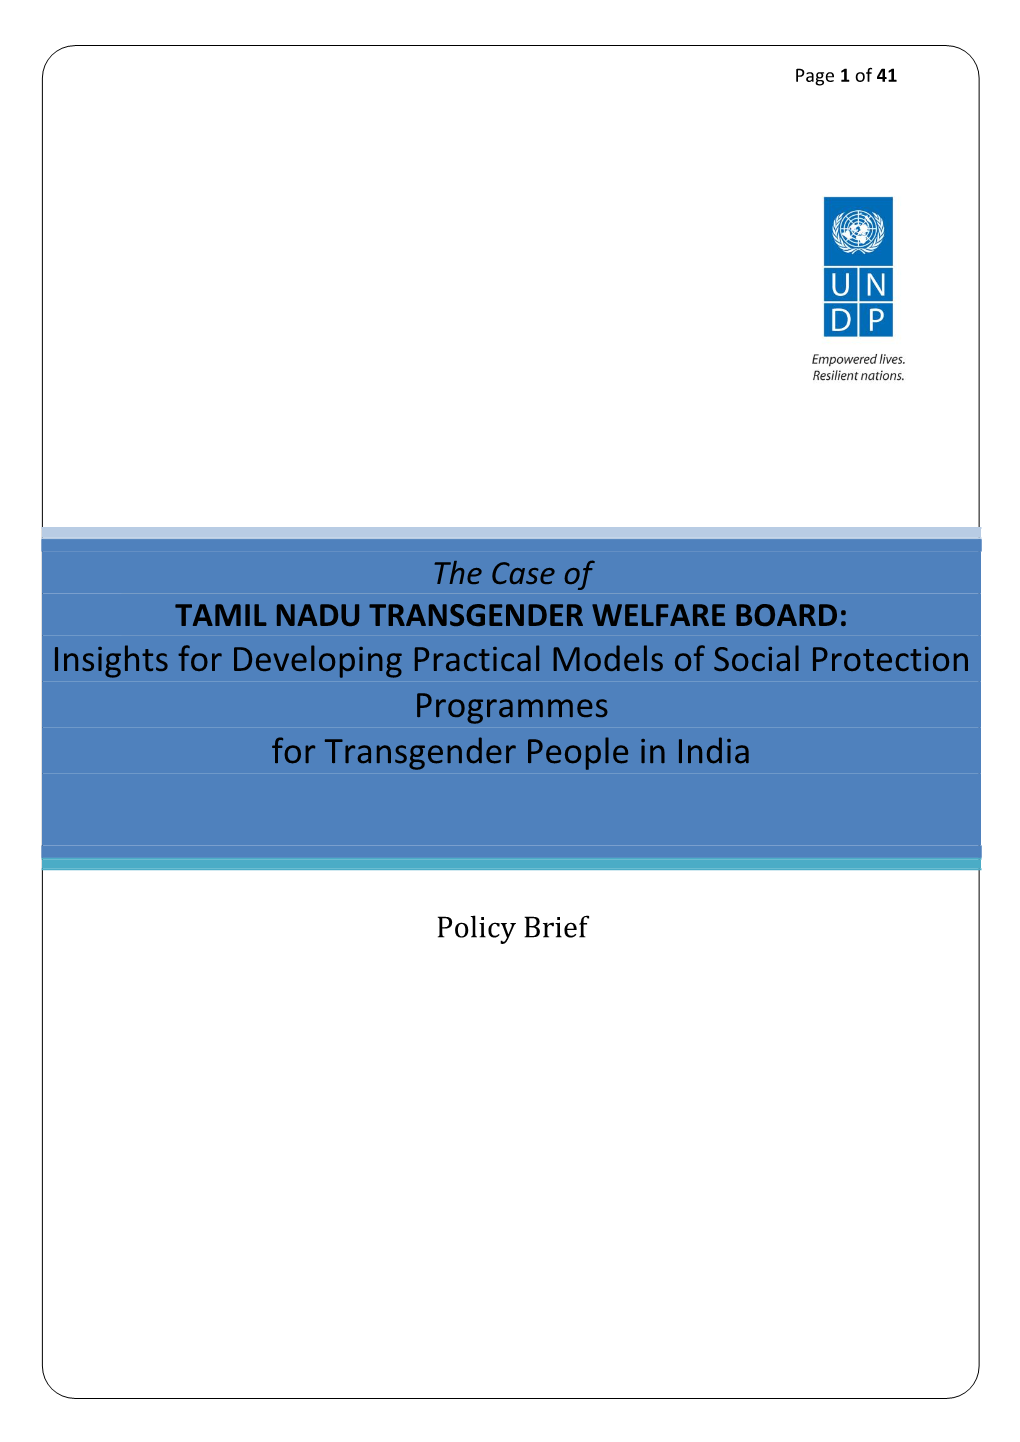 Transgender Welfare Board (P-13) Formation (P-13) Structure and Governance (P-16) Schemes and Activities (P-18) Challenges (P-26) D